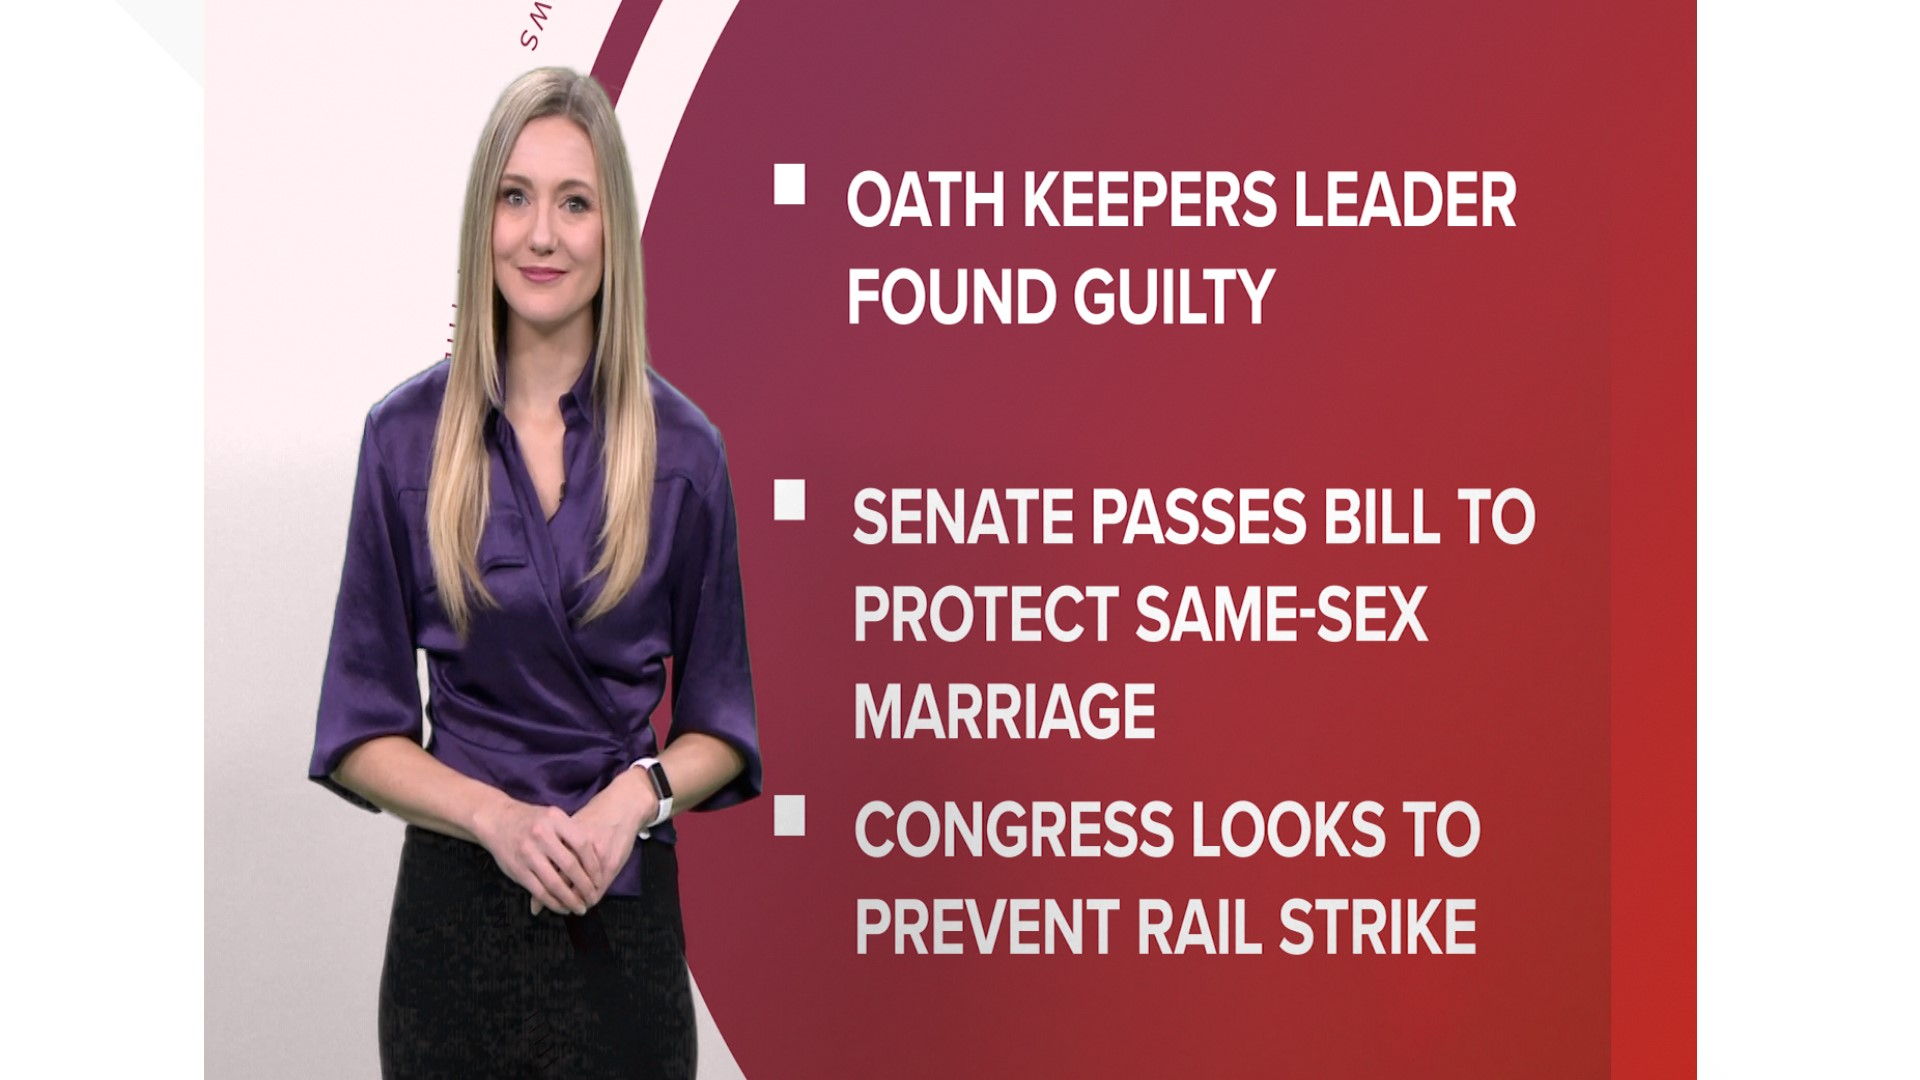 A look at what is happening in the news from Congress discussing the rail strike to the Oath Keepers leaders found guilty and a new Alzheimer's drug.